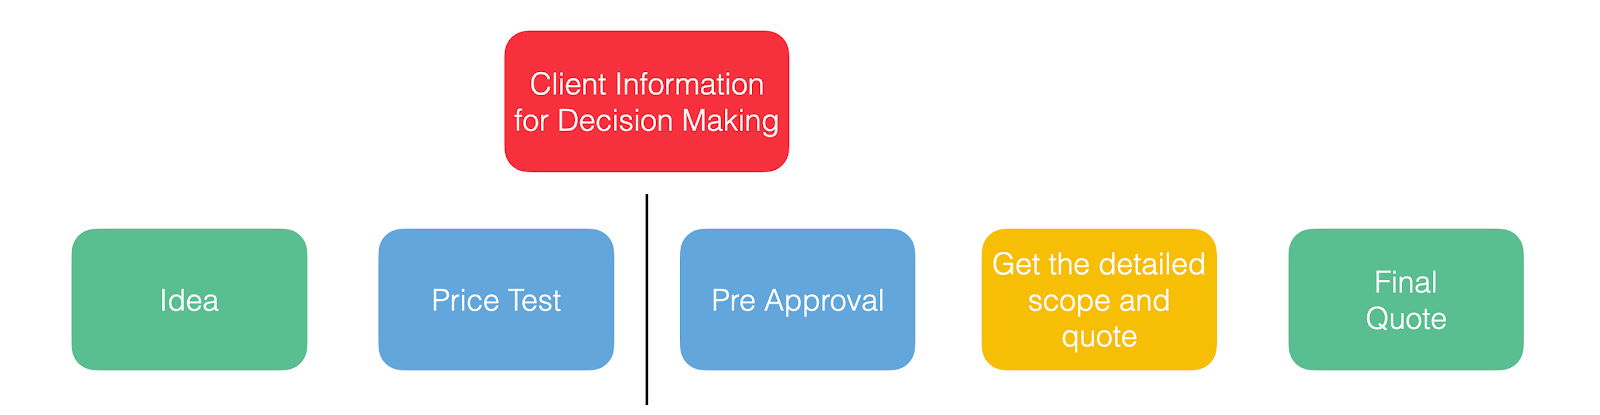 client information for decision making